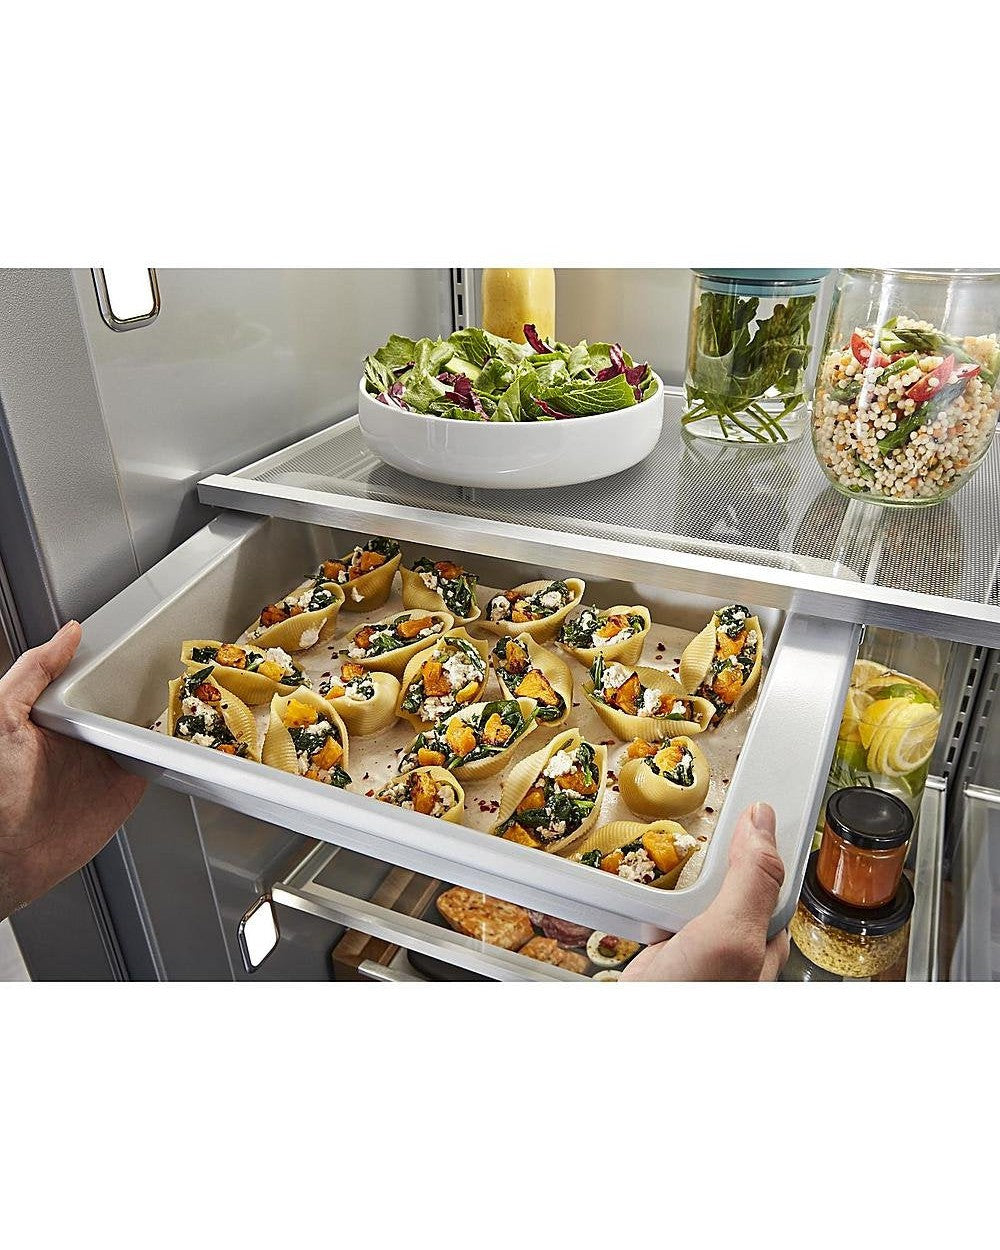 KITCHENAID KBSD702MPS 42&quot; Built-In Side-by-Side Refrigerator with Ice and Water Dispenser